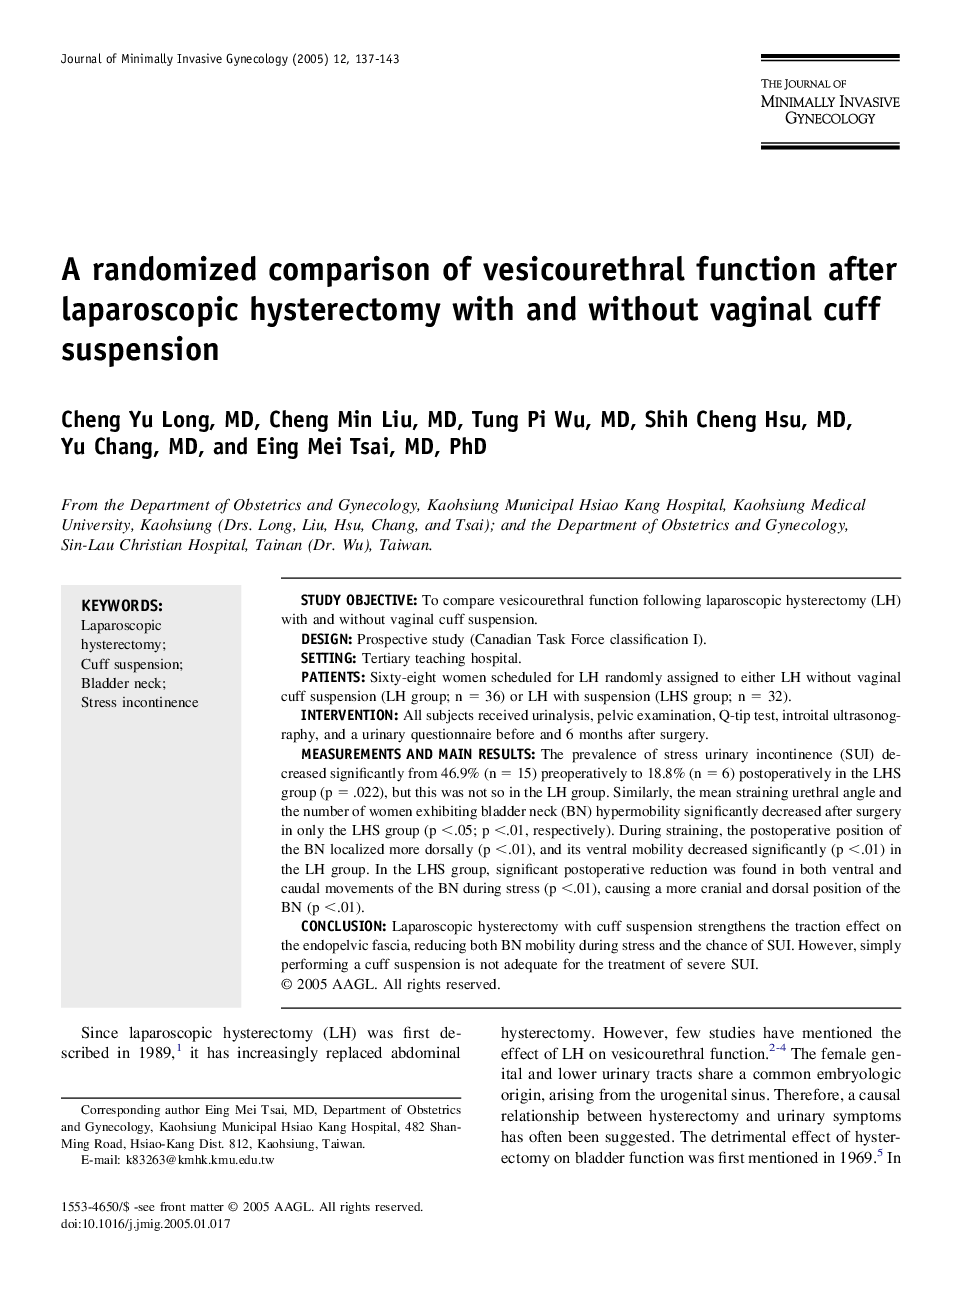 A randomized comparison of vesicourethral function after laparoscopic hysterectomy with and without vaginal cuff suspension